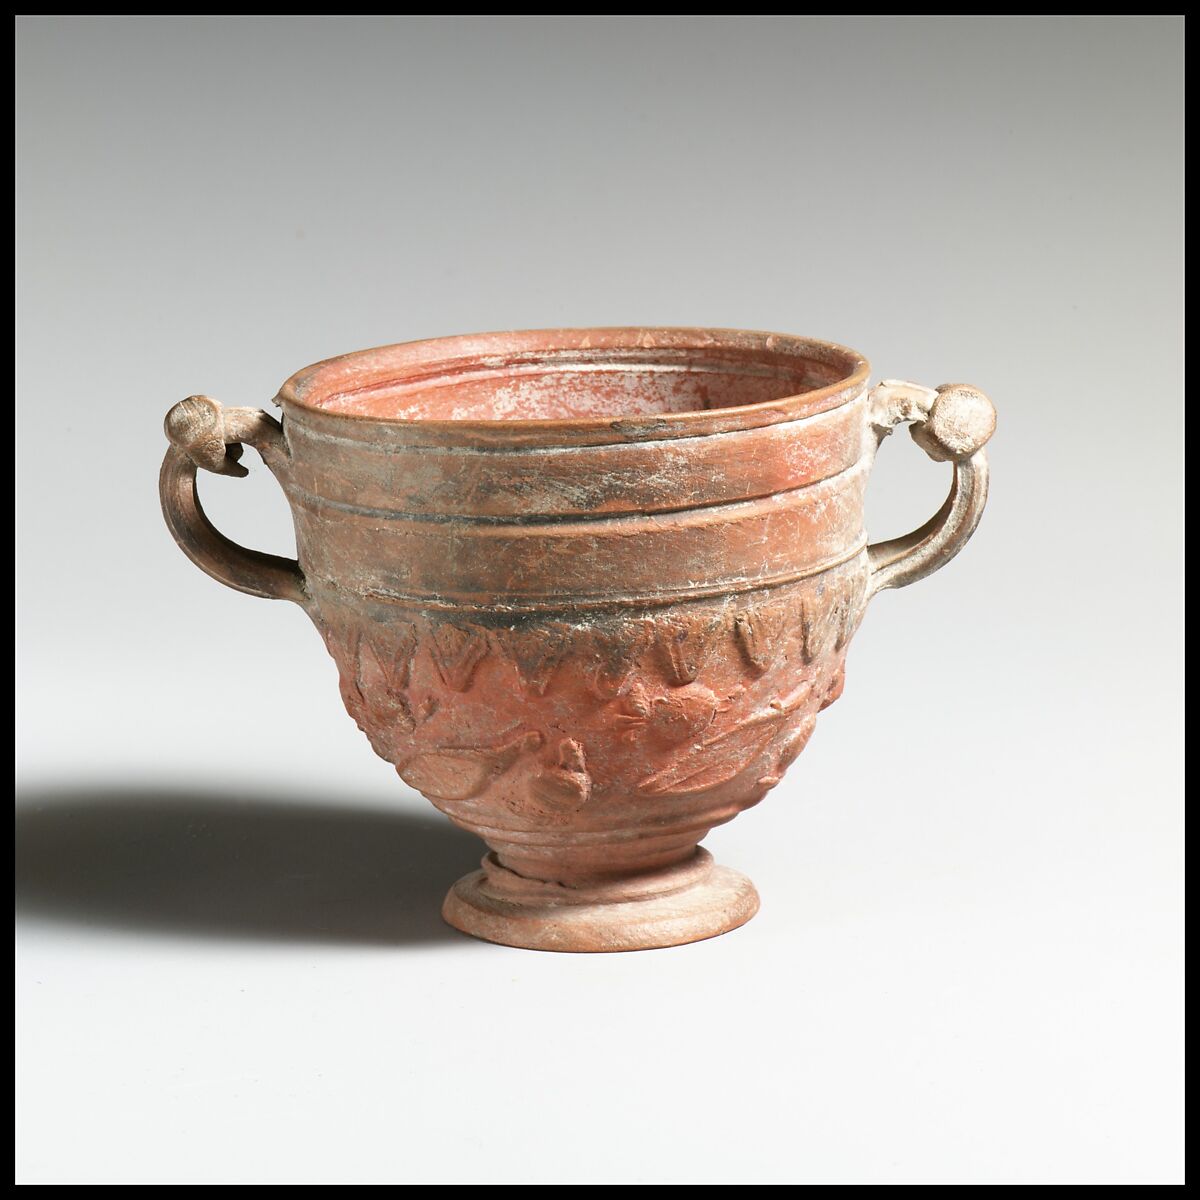 Terracotta cantharus (drinking cup), Terracotta, Roman 